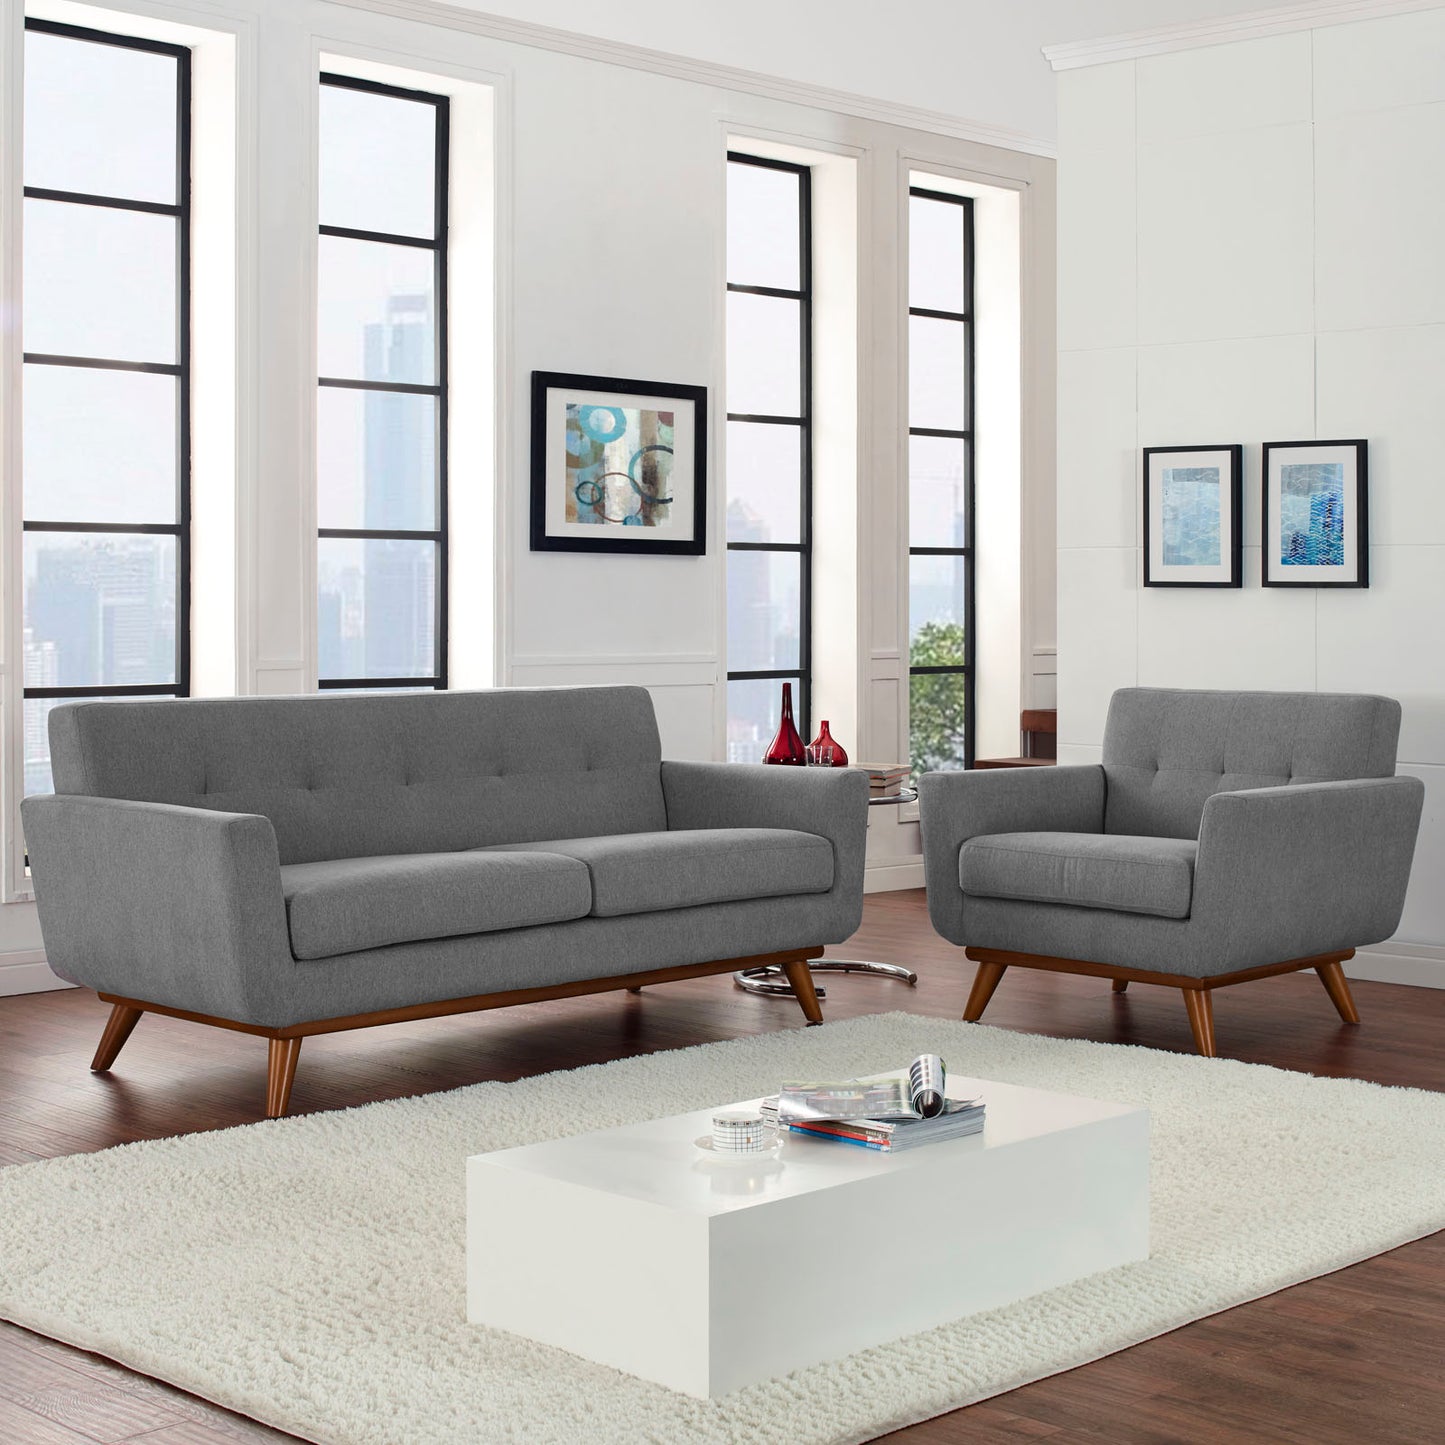 Engage Armchair and Loveseat Set of 2 Expectation Gray EEI-1346-GRY